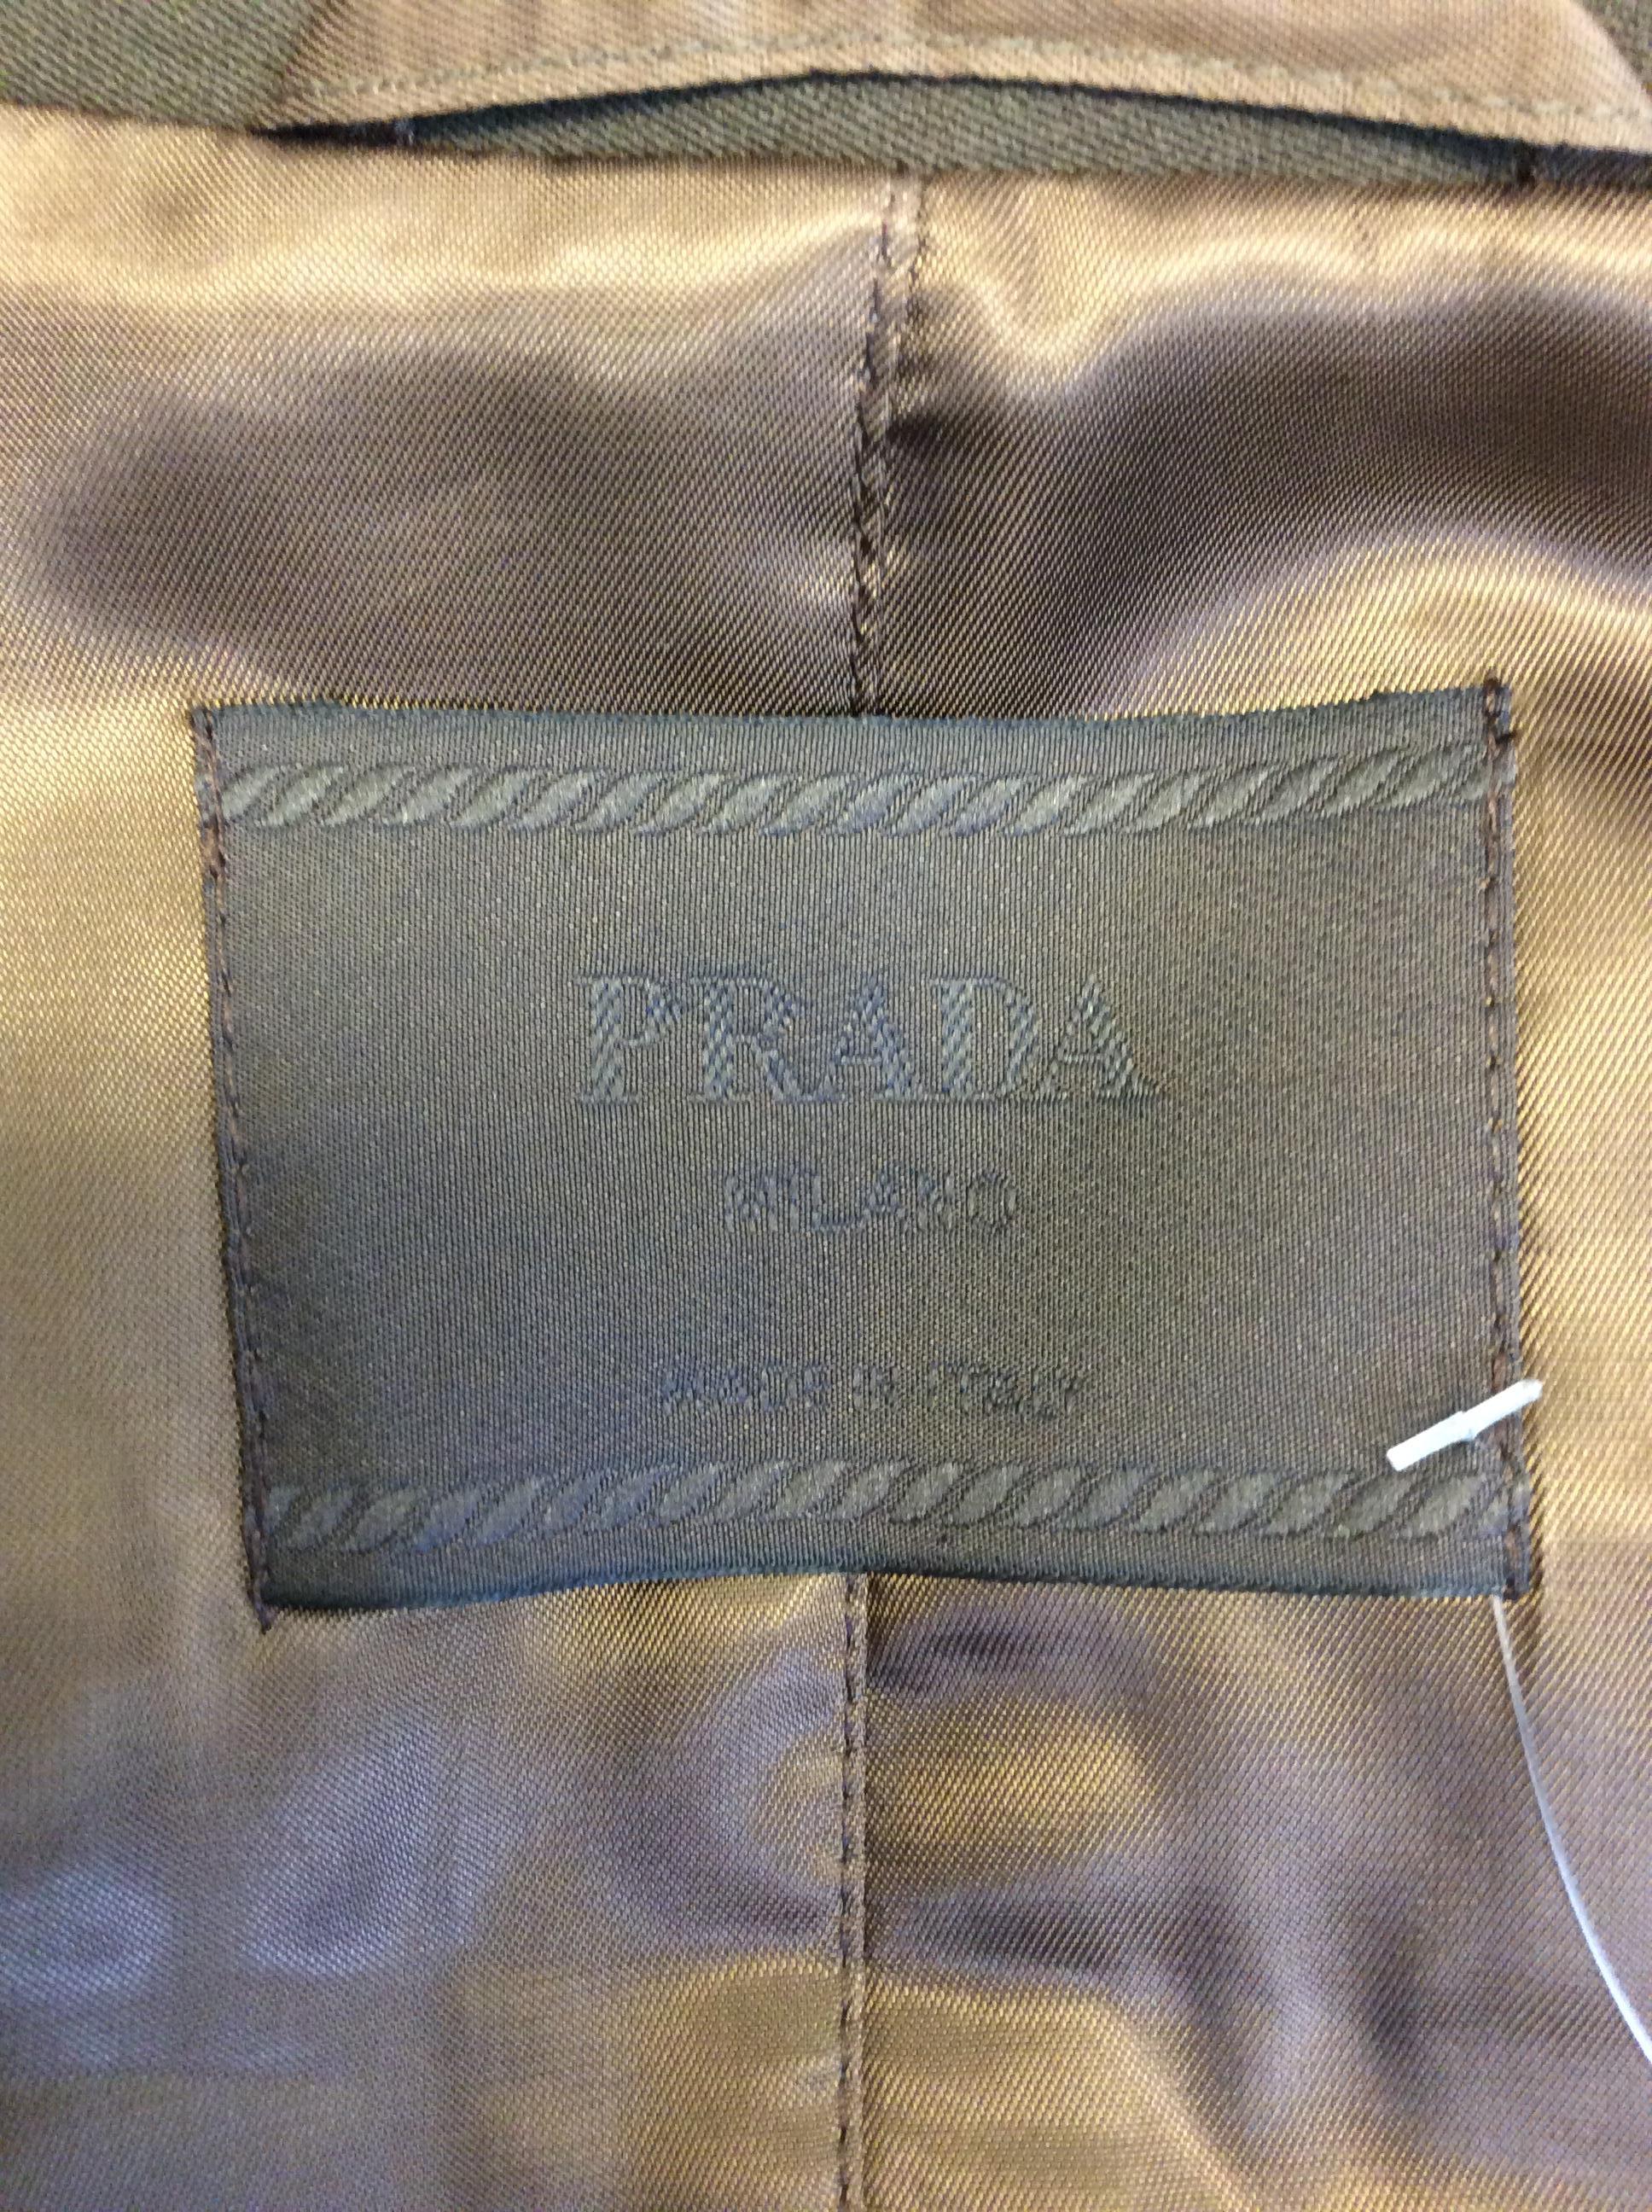 Prada Tan and Brown Belted Coat For Sale 5